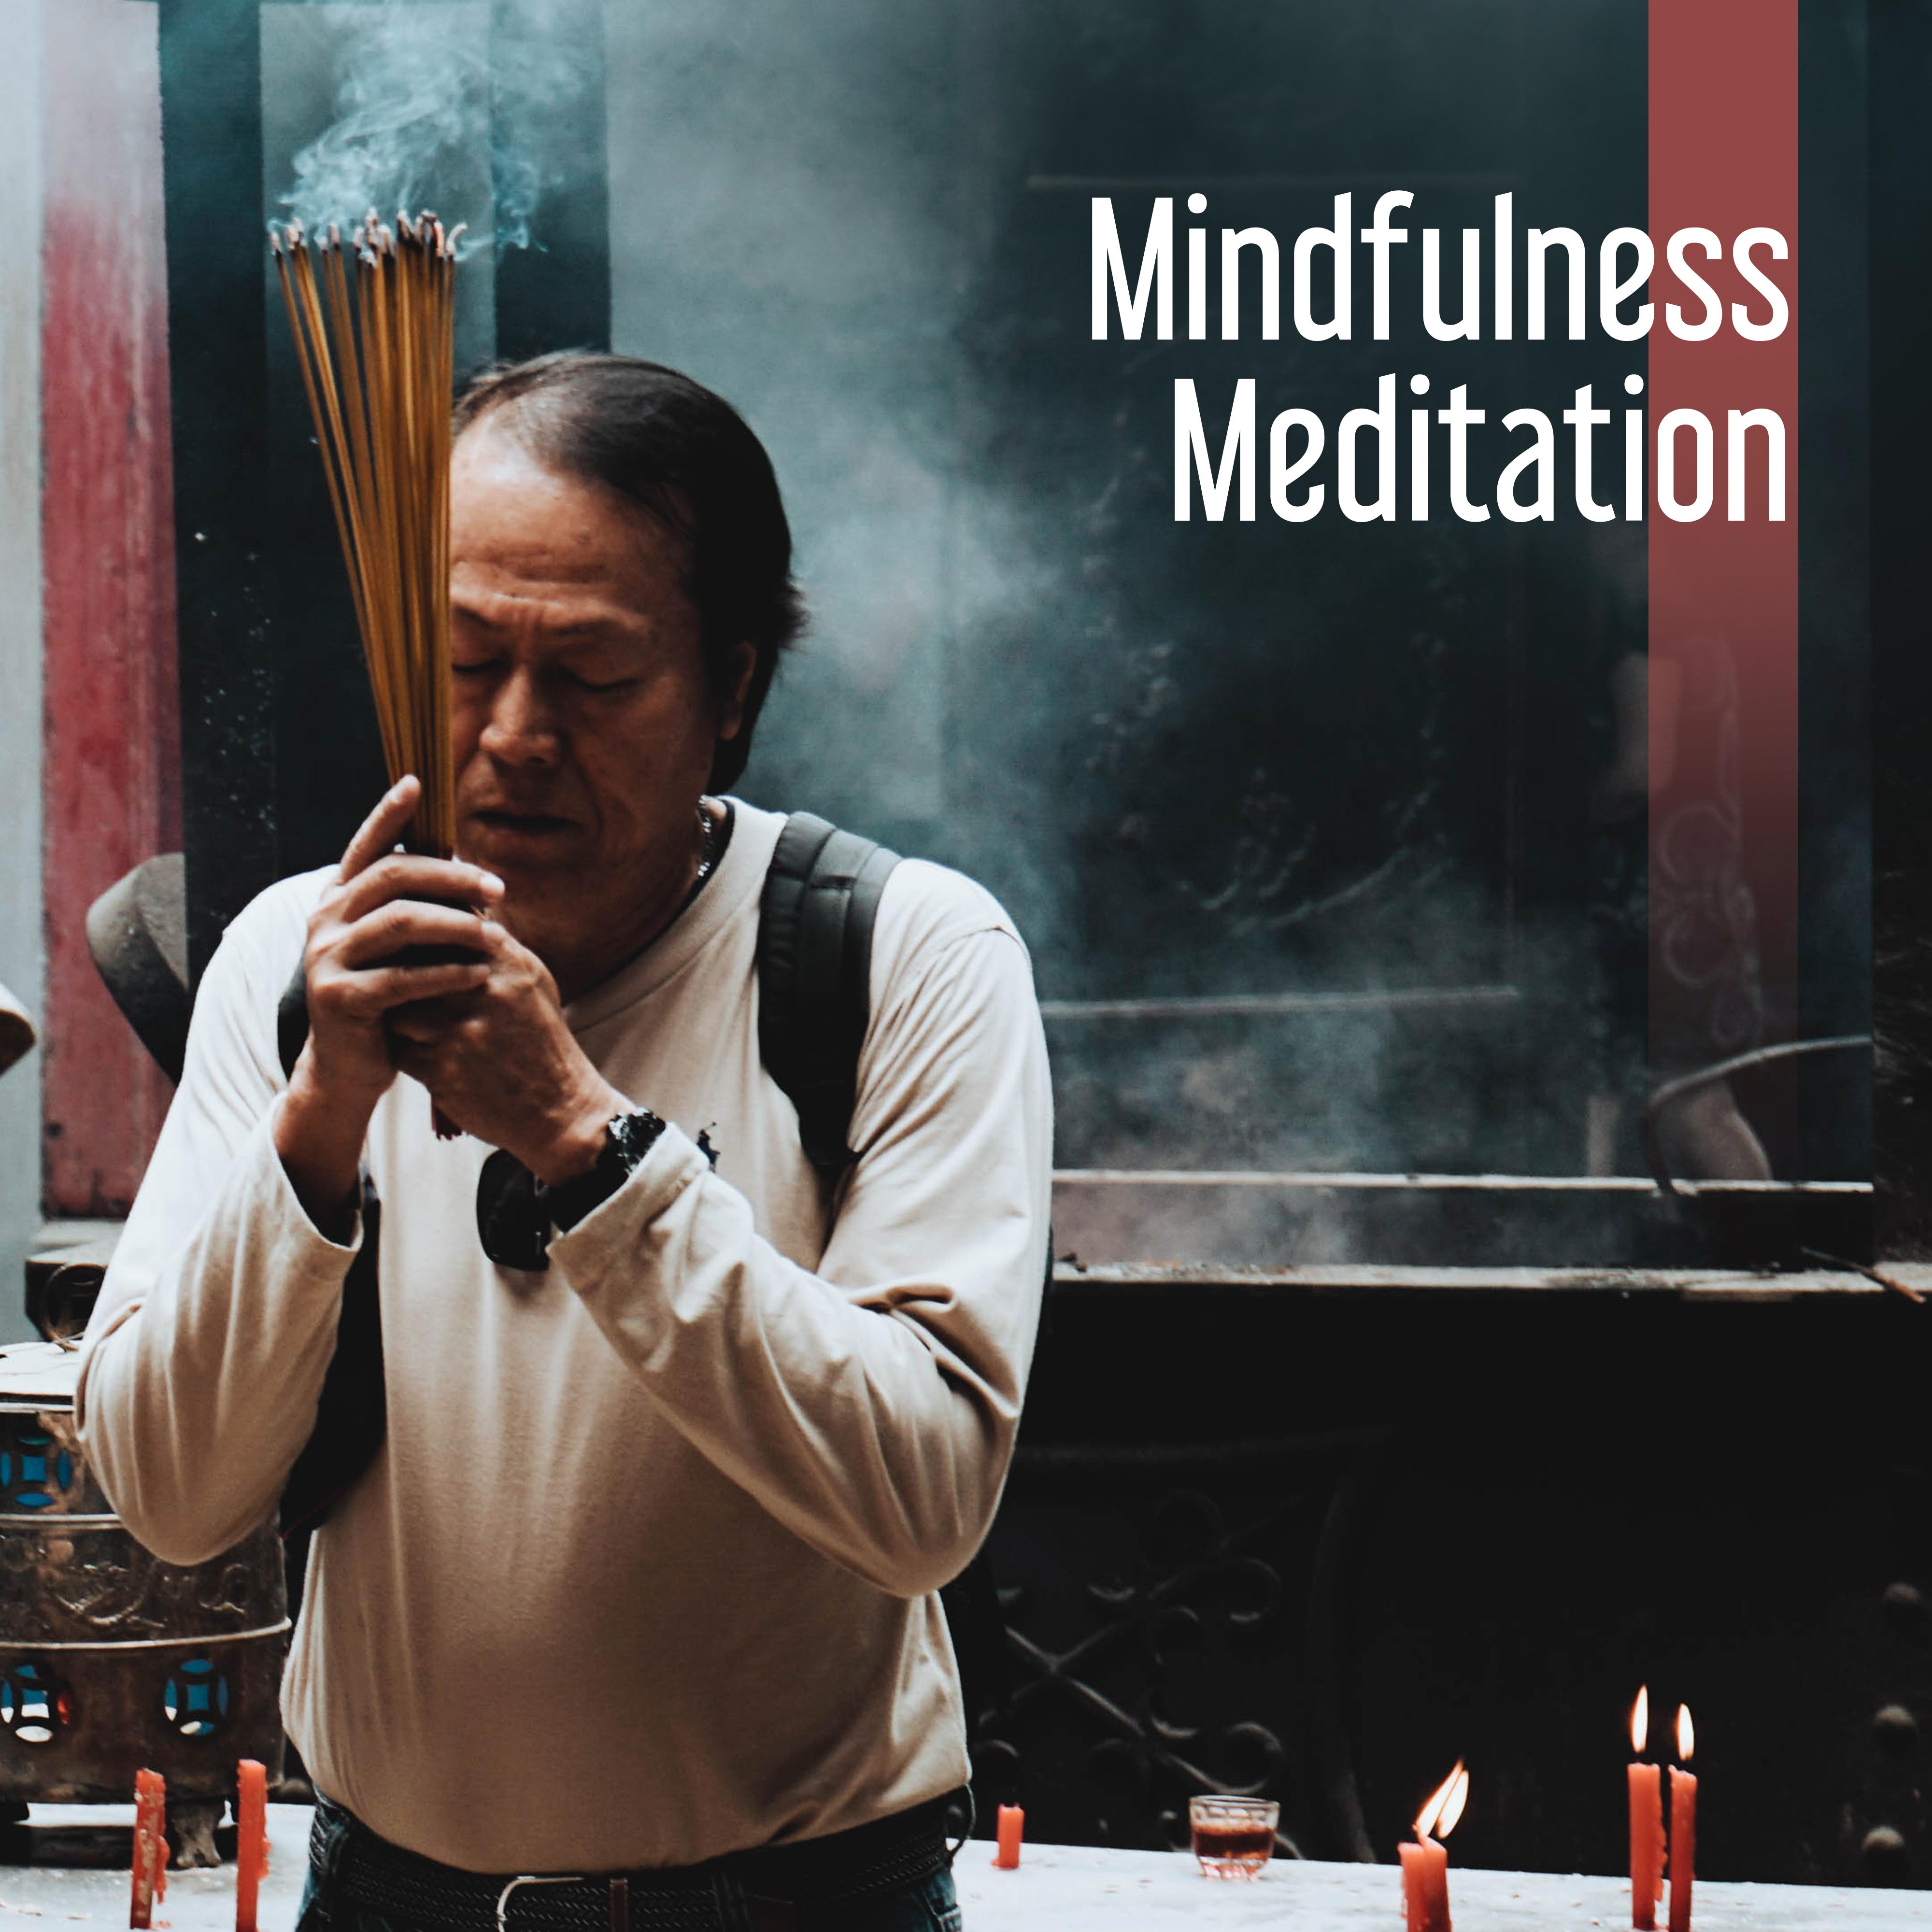 Mindfulness Meditation – Music for Learning, Helpful for Keep Focus on the Task, Calming Sounds of Nature, Calm Down, Relax & Work